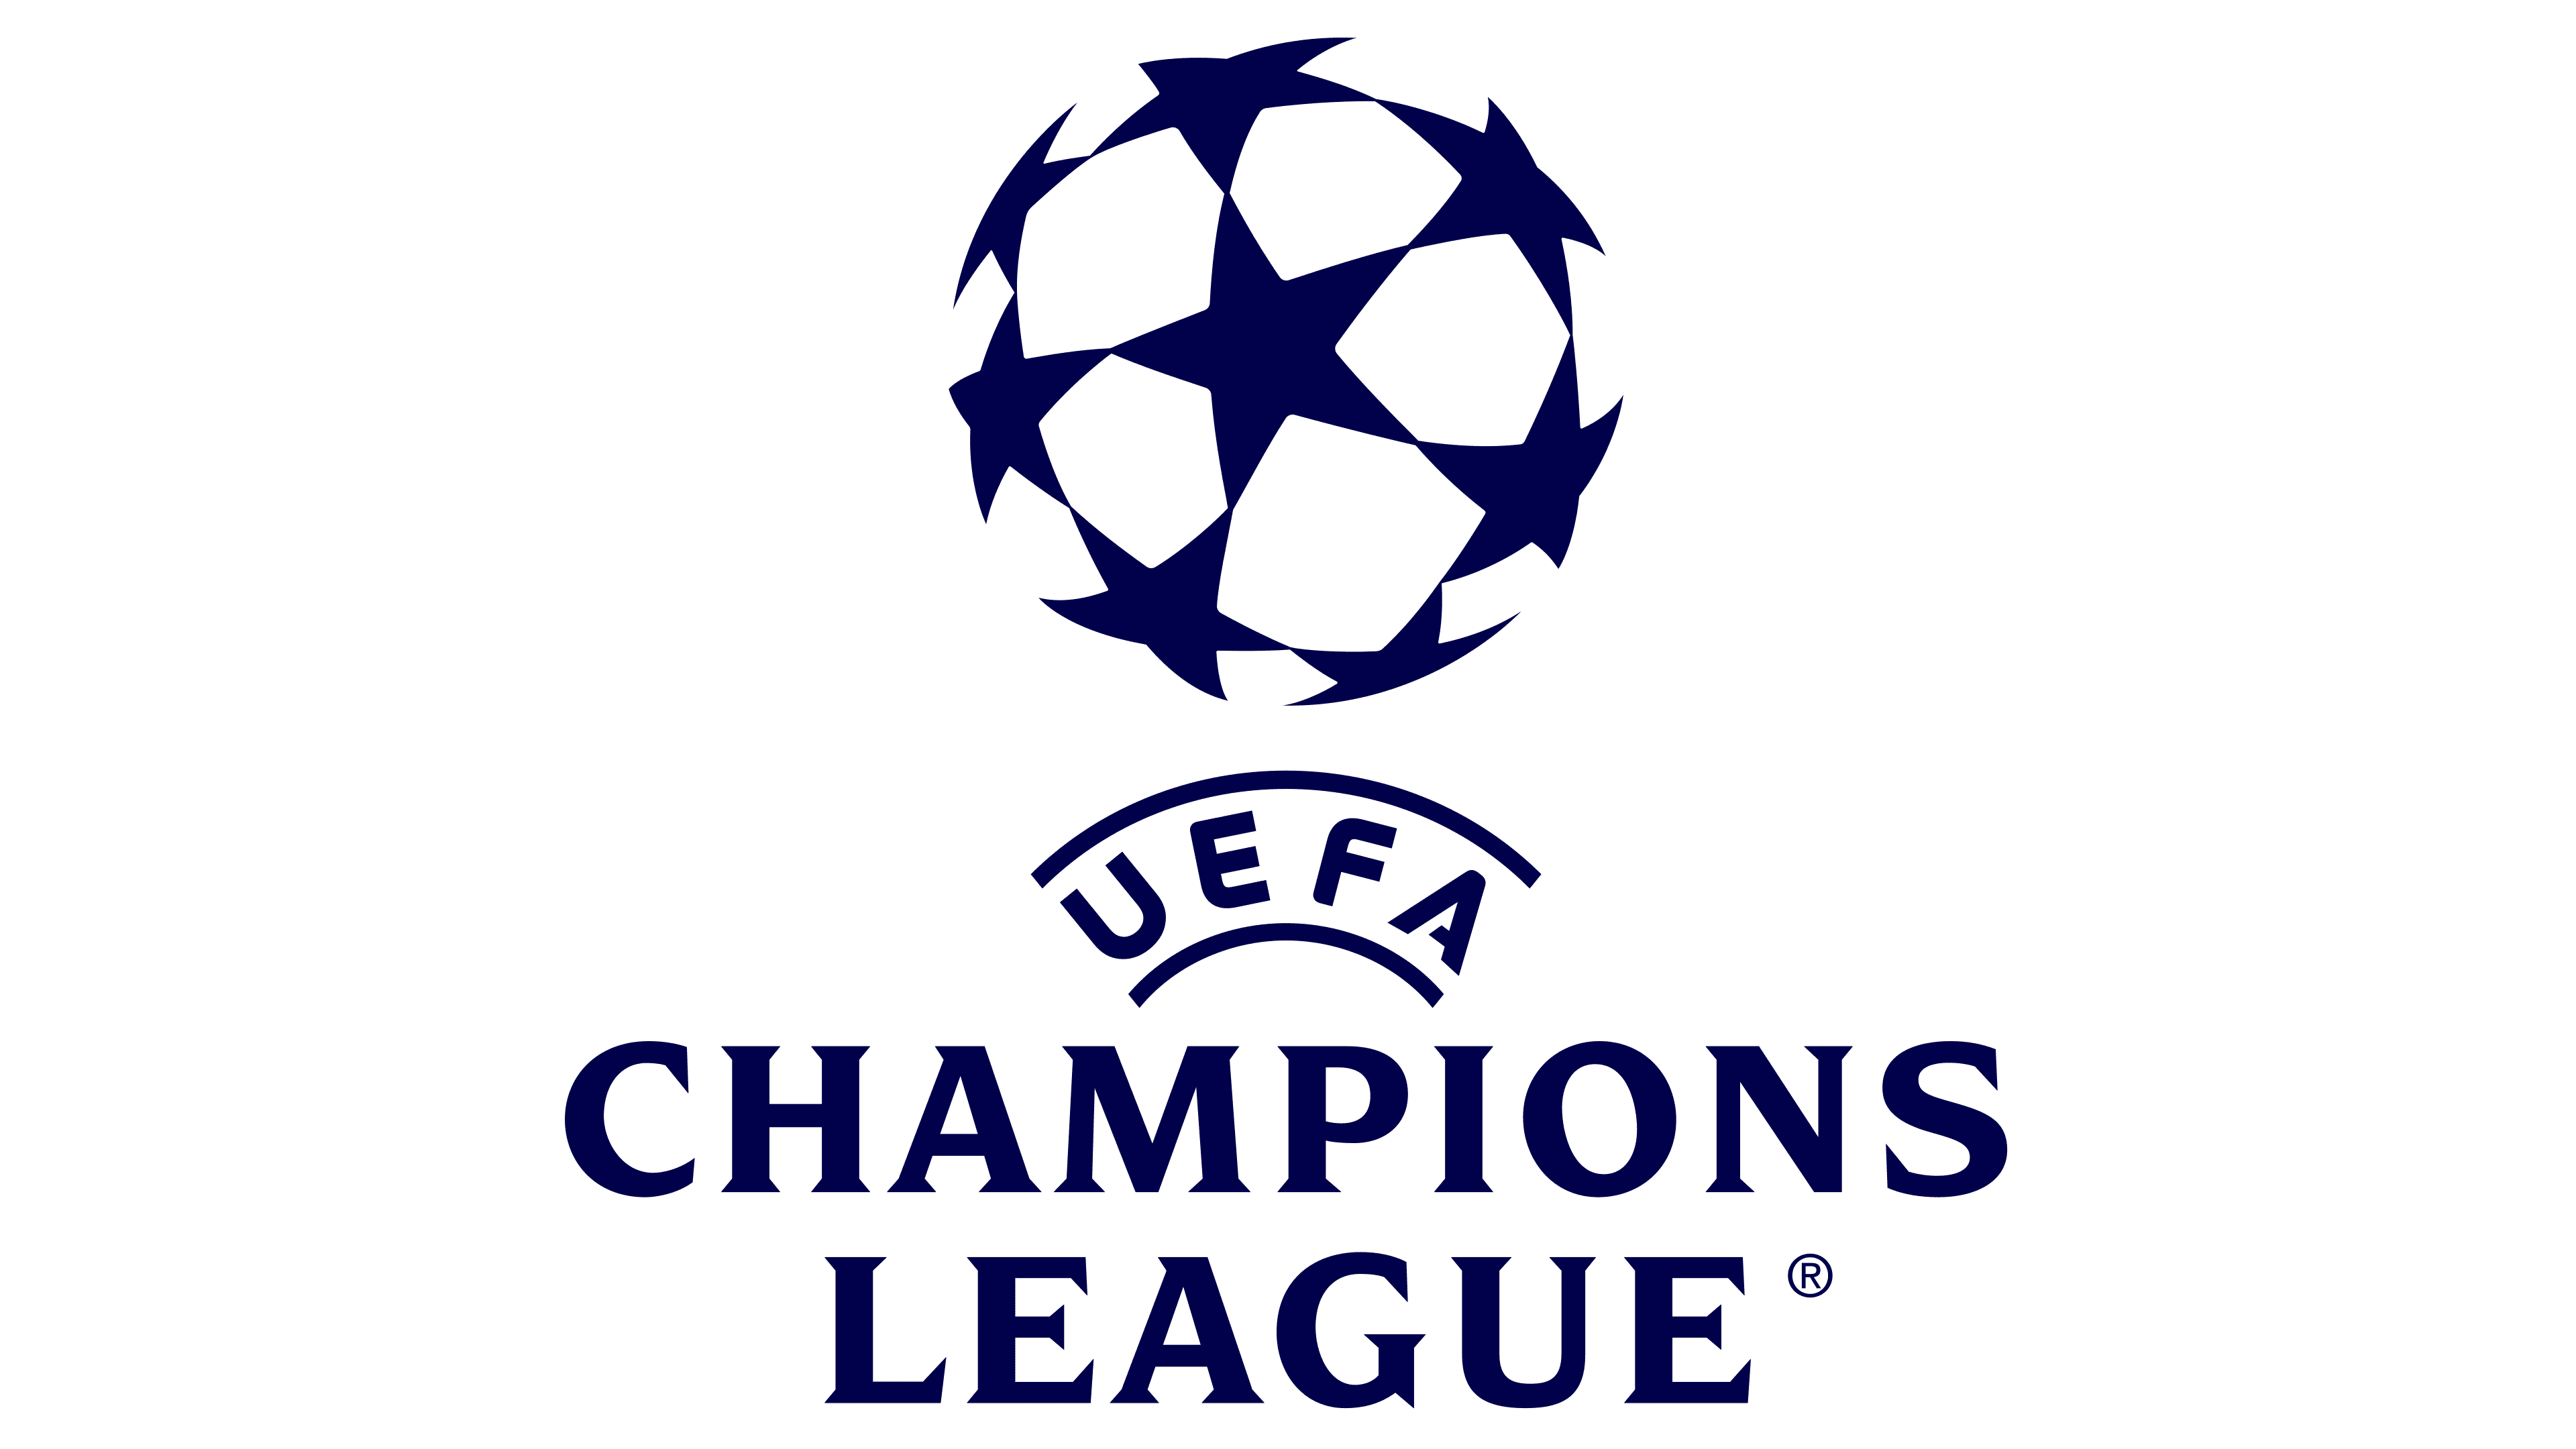 UEFA Champions League logo and symbol, meaning, history, PNG